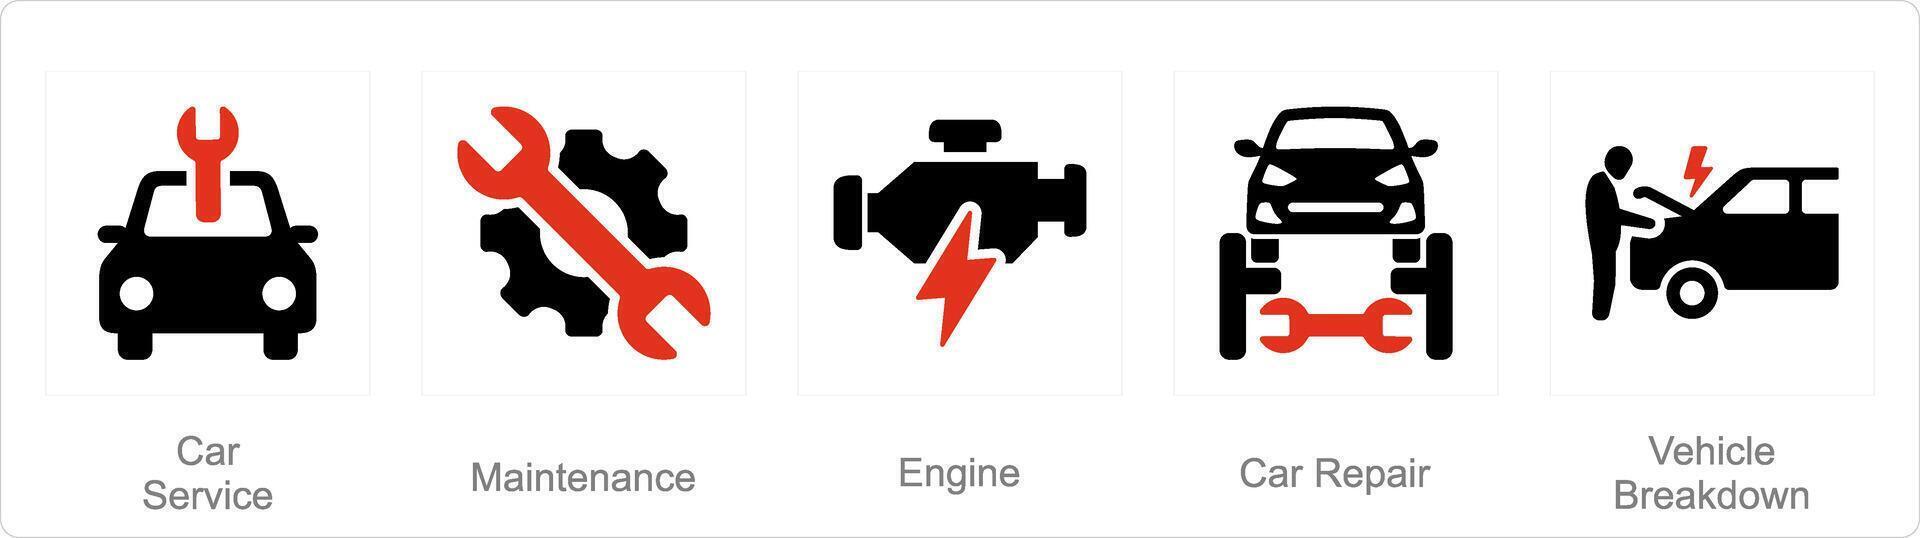 A set of 5 Car icons as car service, maintenance, engine vector